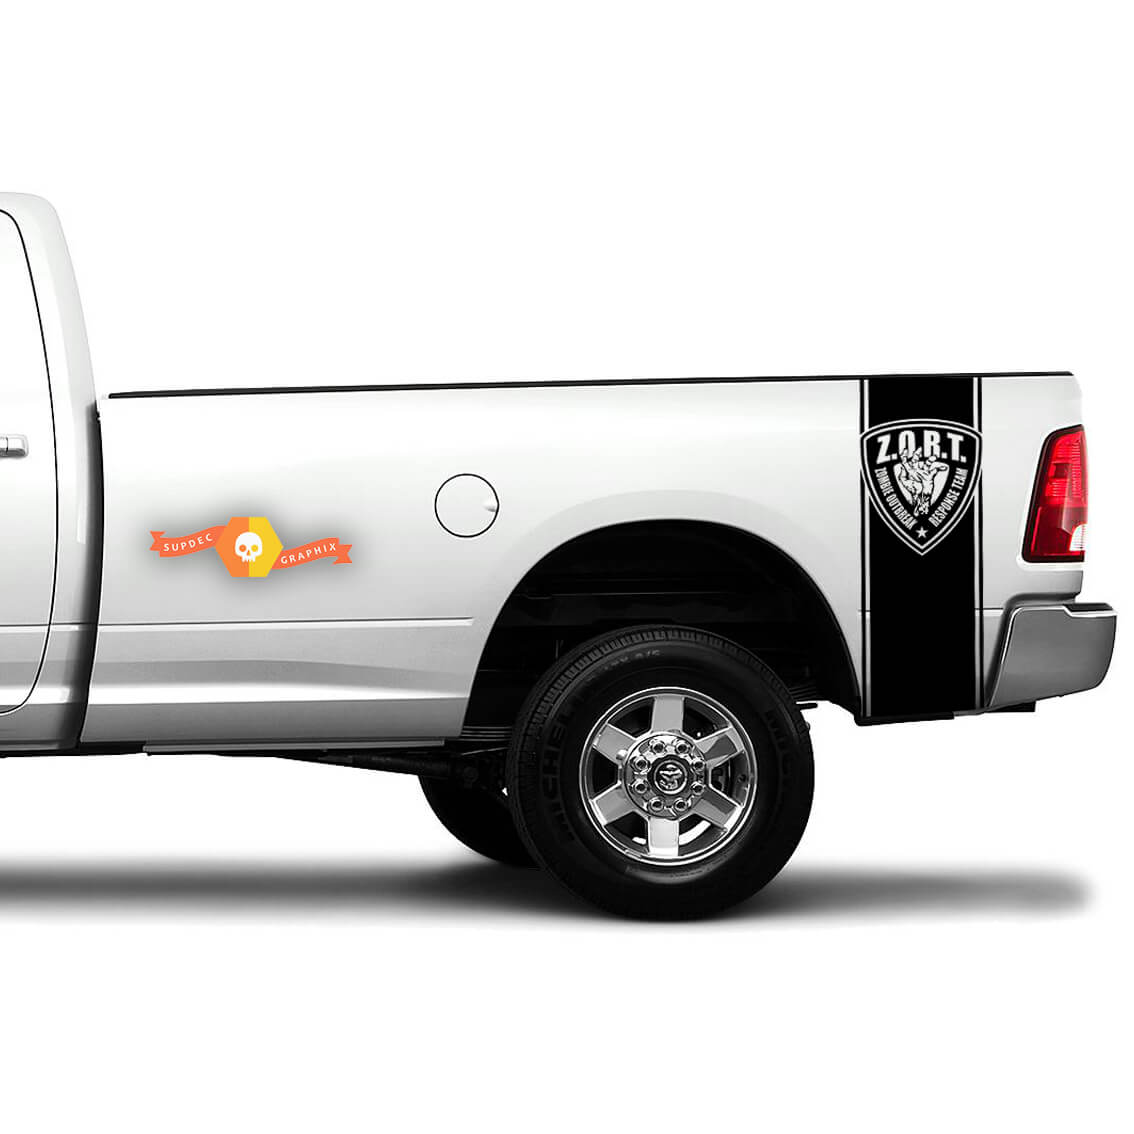 Zombie Hand ZORT Outbreak Truck Bed side Decal Stickers fits to Dodge Ram Chevy Ford F150 Toyota 